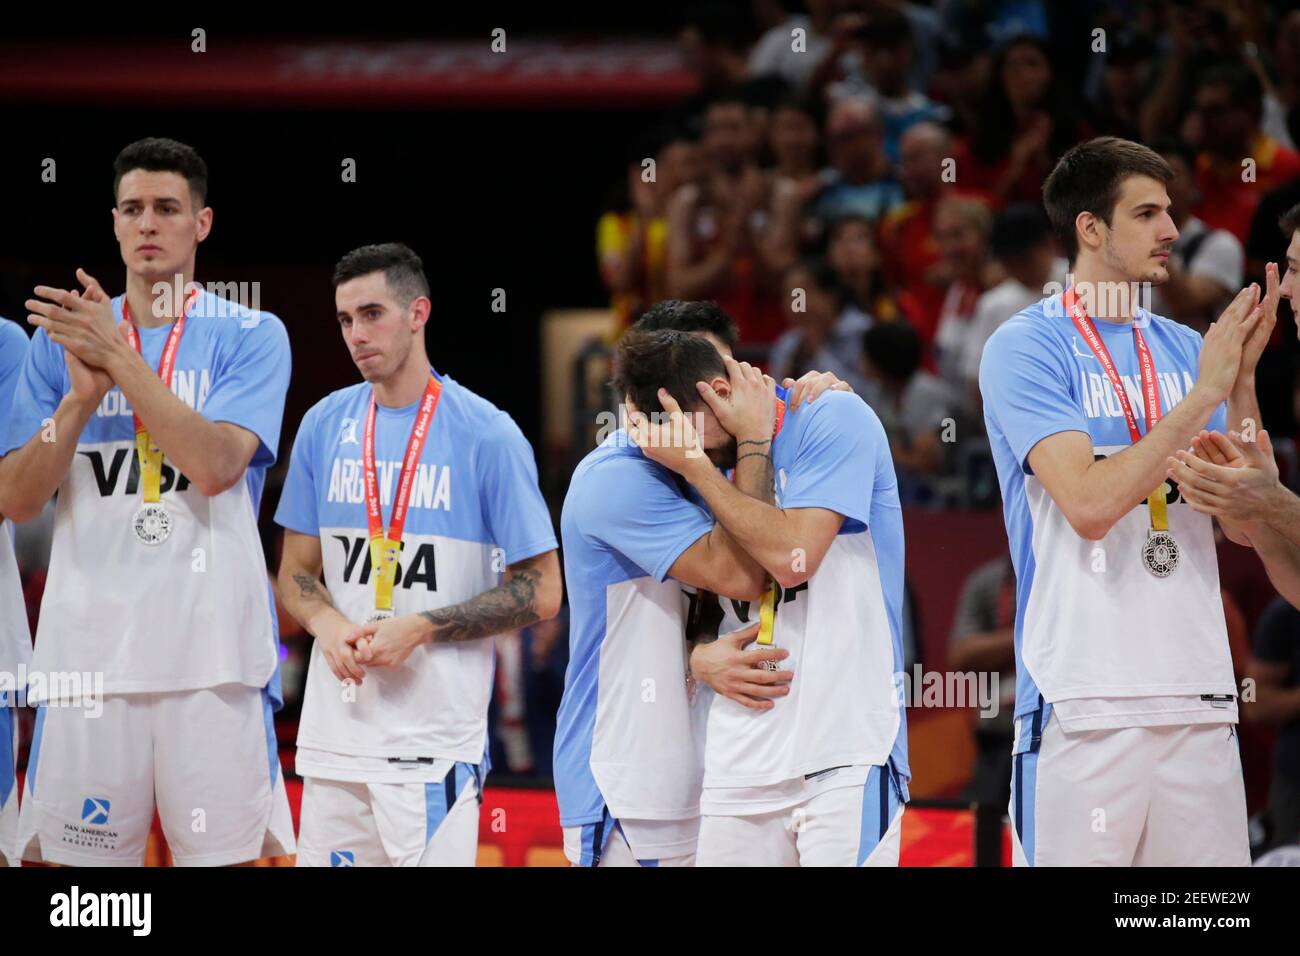 Basketball - FIBA World Cup - Final - Argentina v Spain - Wukesong Sport Arena, Beijing, China - September 15, 2019   Argentina's players look dejected during the ceremony after receiving their silver medals REUTERS/Jason Lee Stock Photo